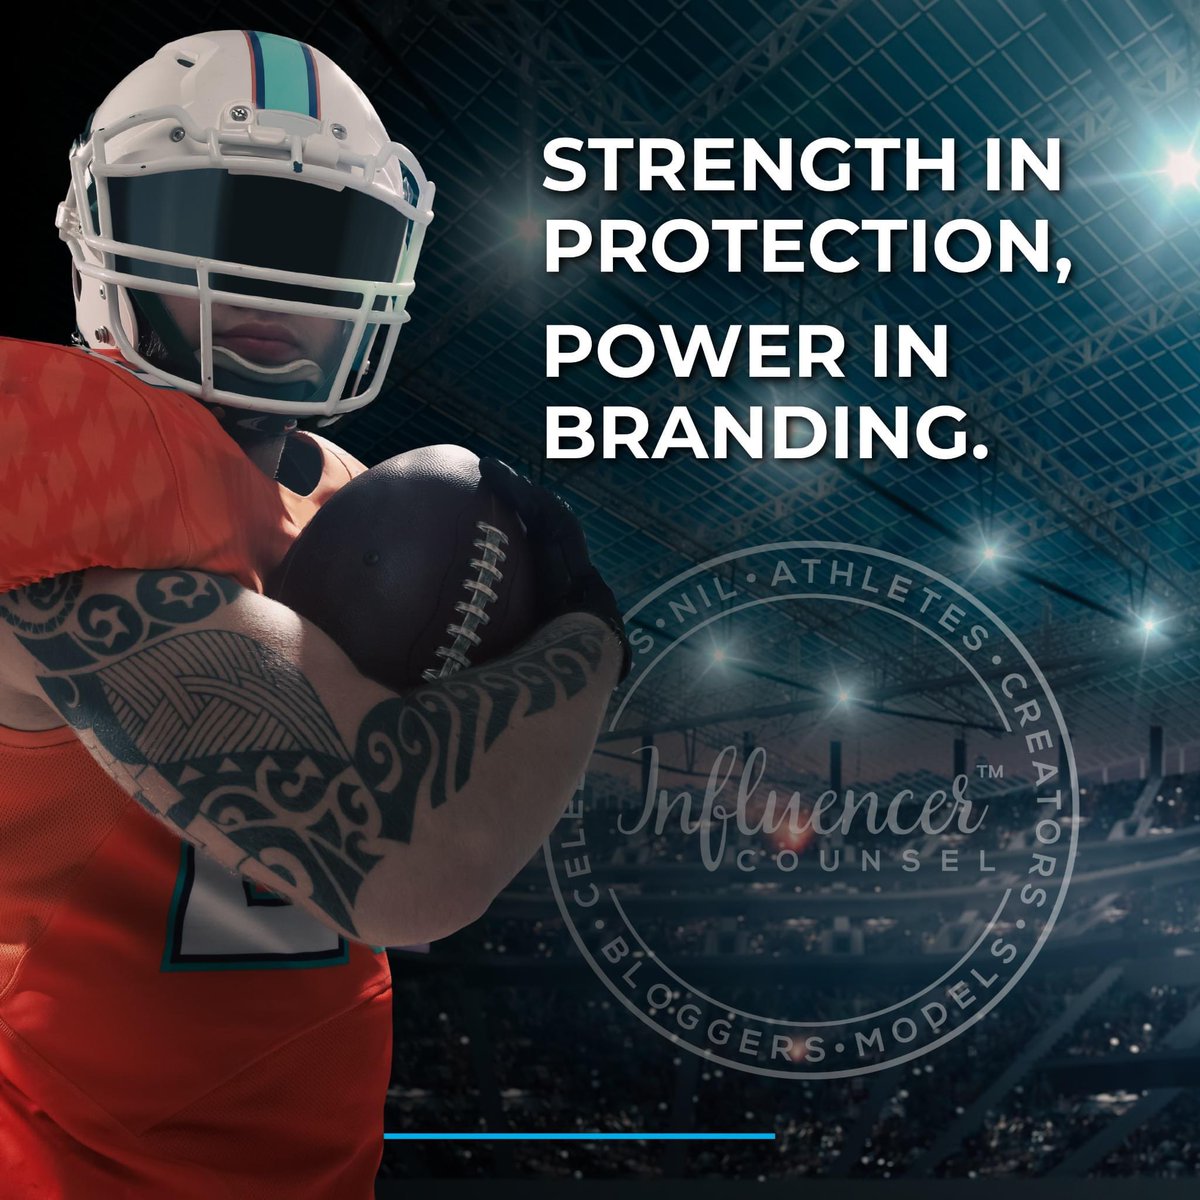 As an influencer, understanding the legal aspects of your brand is crucial. From copyrights to contracts, we're here to empower you with knowledge and protection.

Ready to take control of your influence? Drop us a DM to get started.

#NIL #NameImageLikeness #AthleteEmpowerment